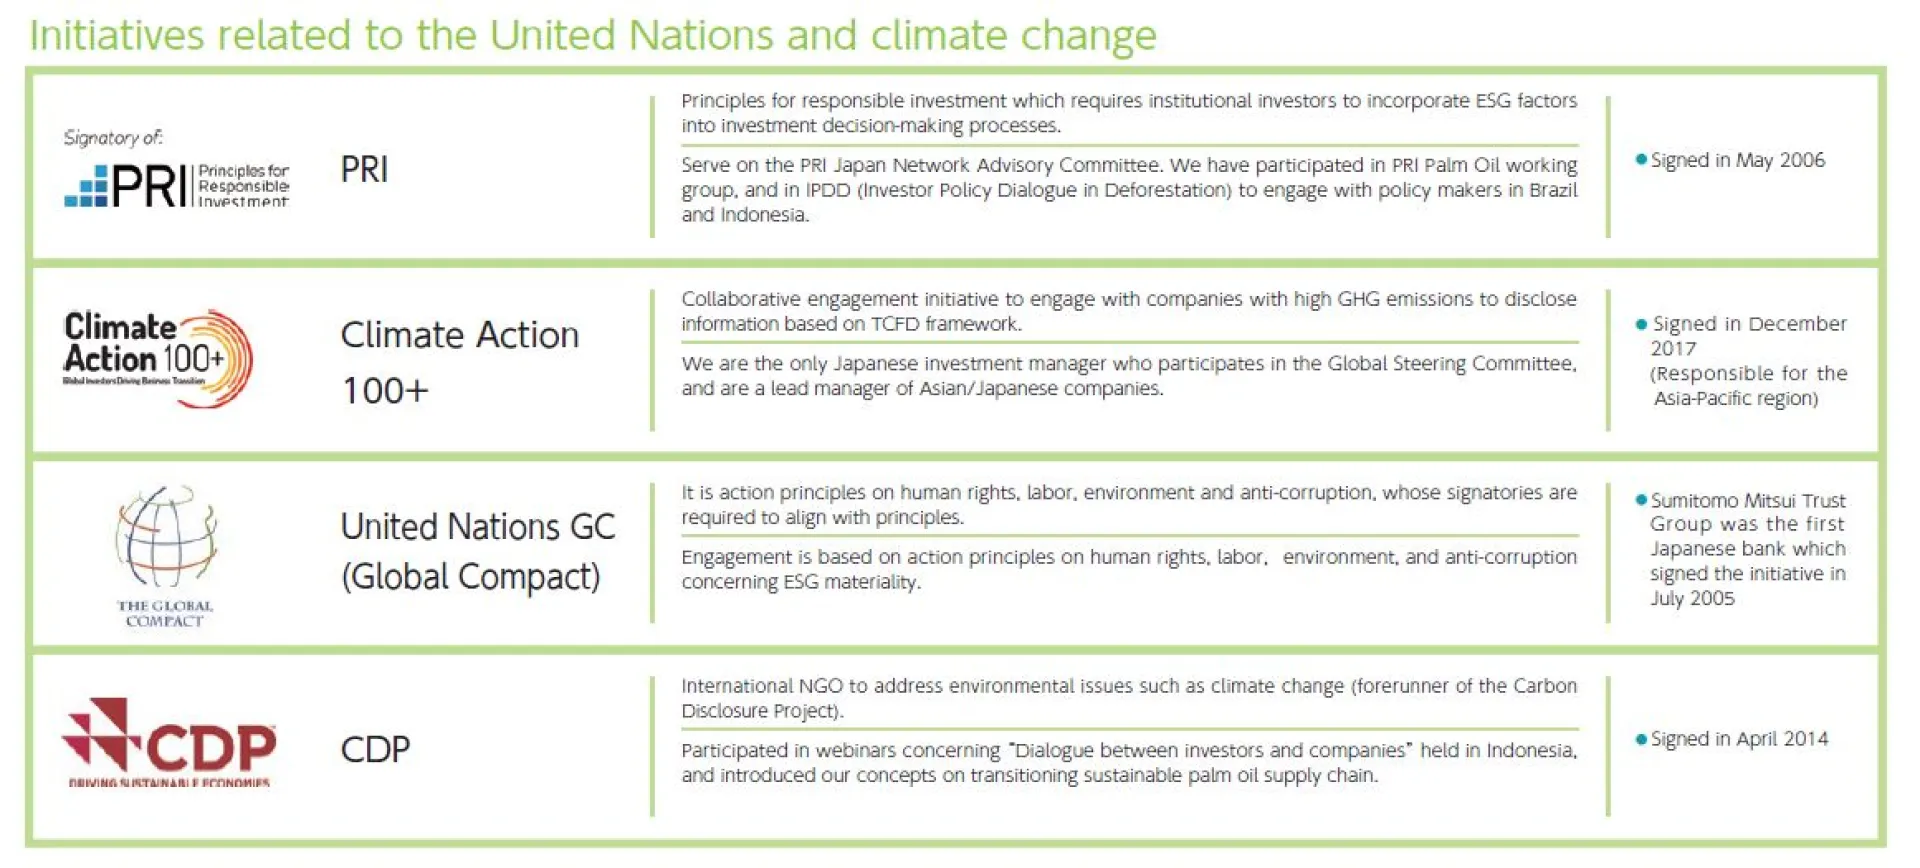 6) Global inititatives - related to the UN and climate change